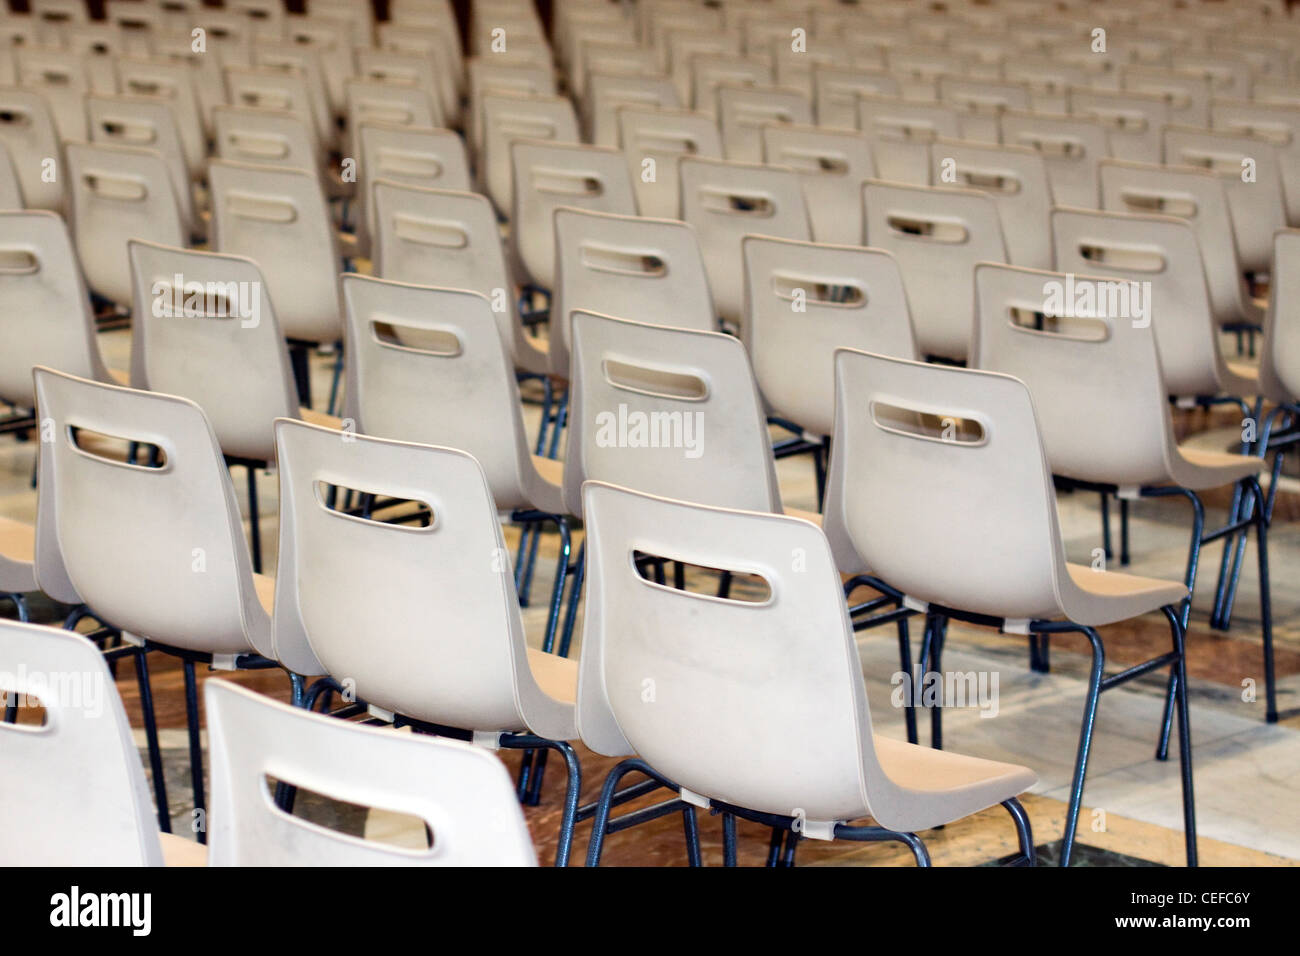 Row of empty chairs at the Alter of St. Peter's Basilica Basilica di San Pietro Vatican city Rome Stock Photo